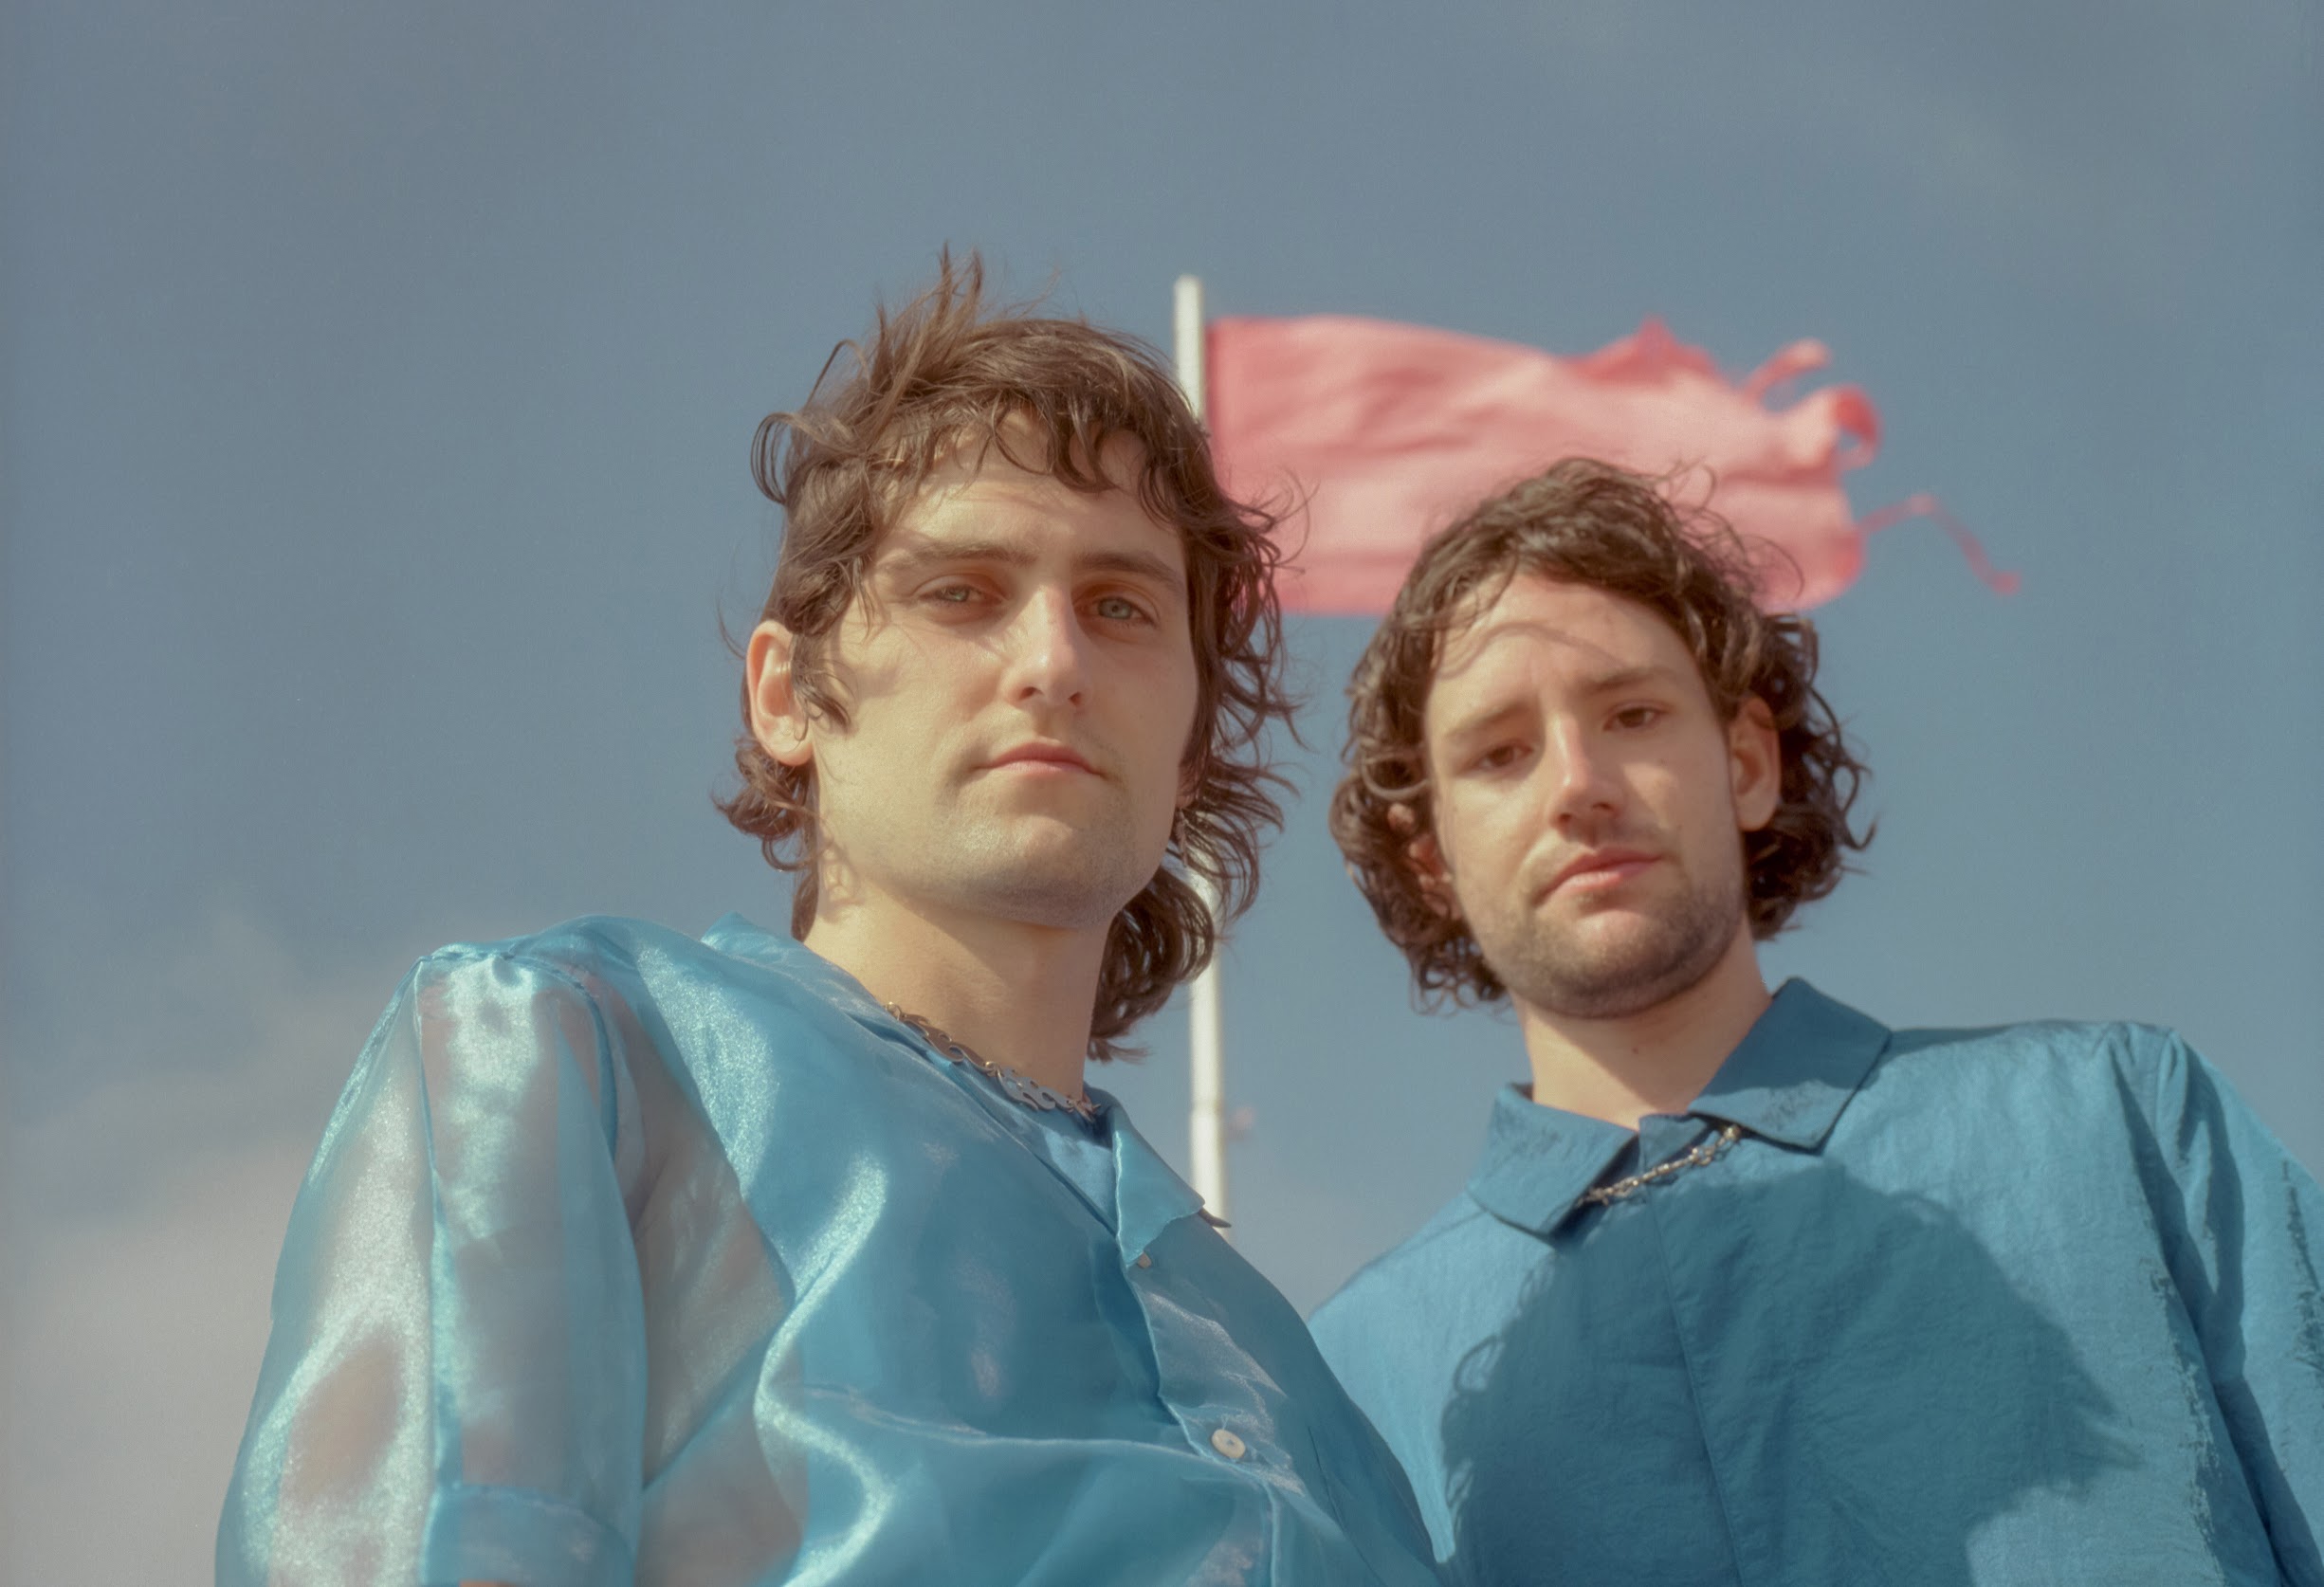 US INDIE DUO SPORTS IMPRESS WITH CHILLED OUT NEW SINGLE ‘BABY BABY’